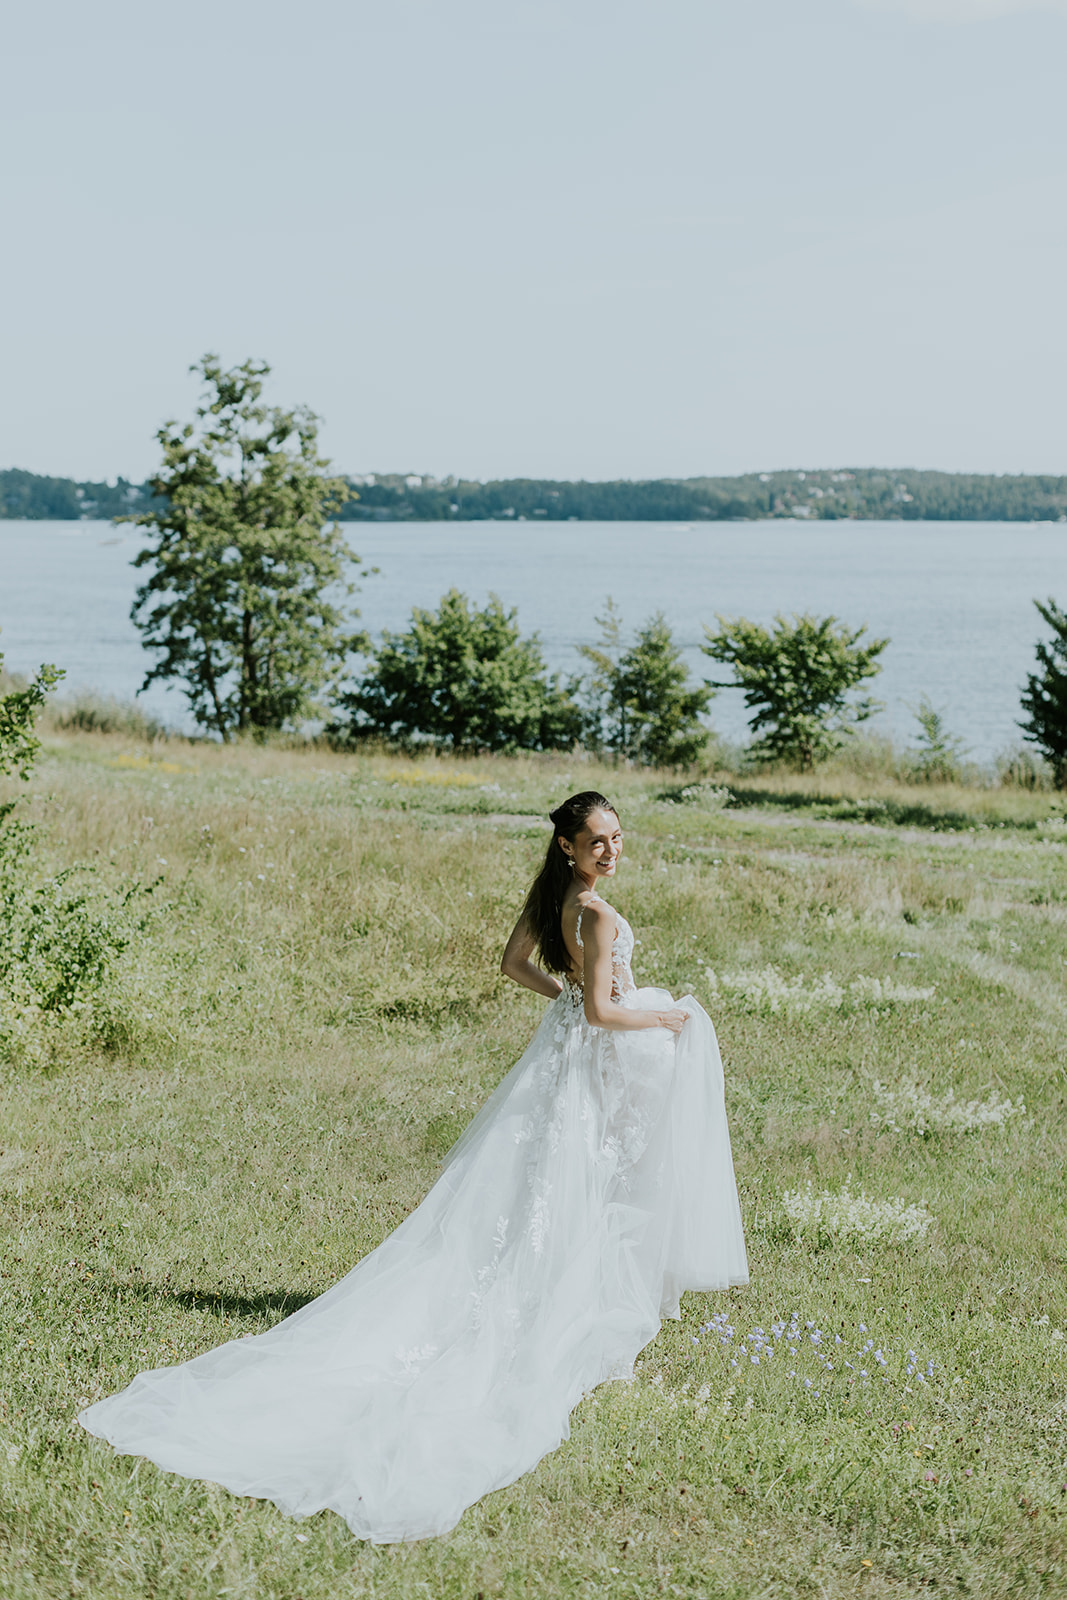 Professional Wedding Photography Services in Stockholm